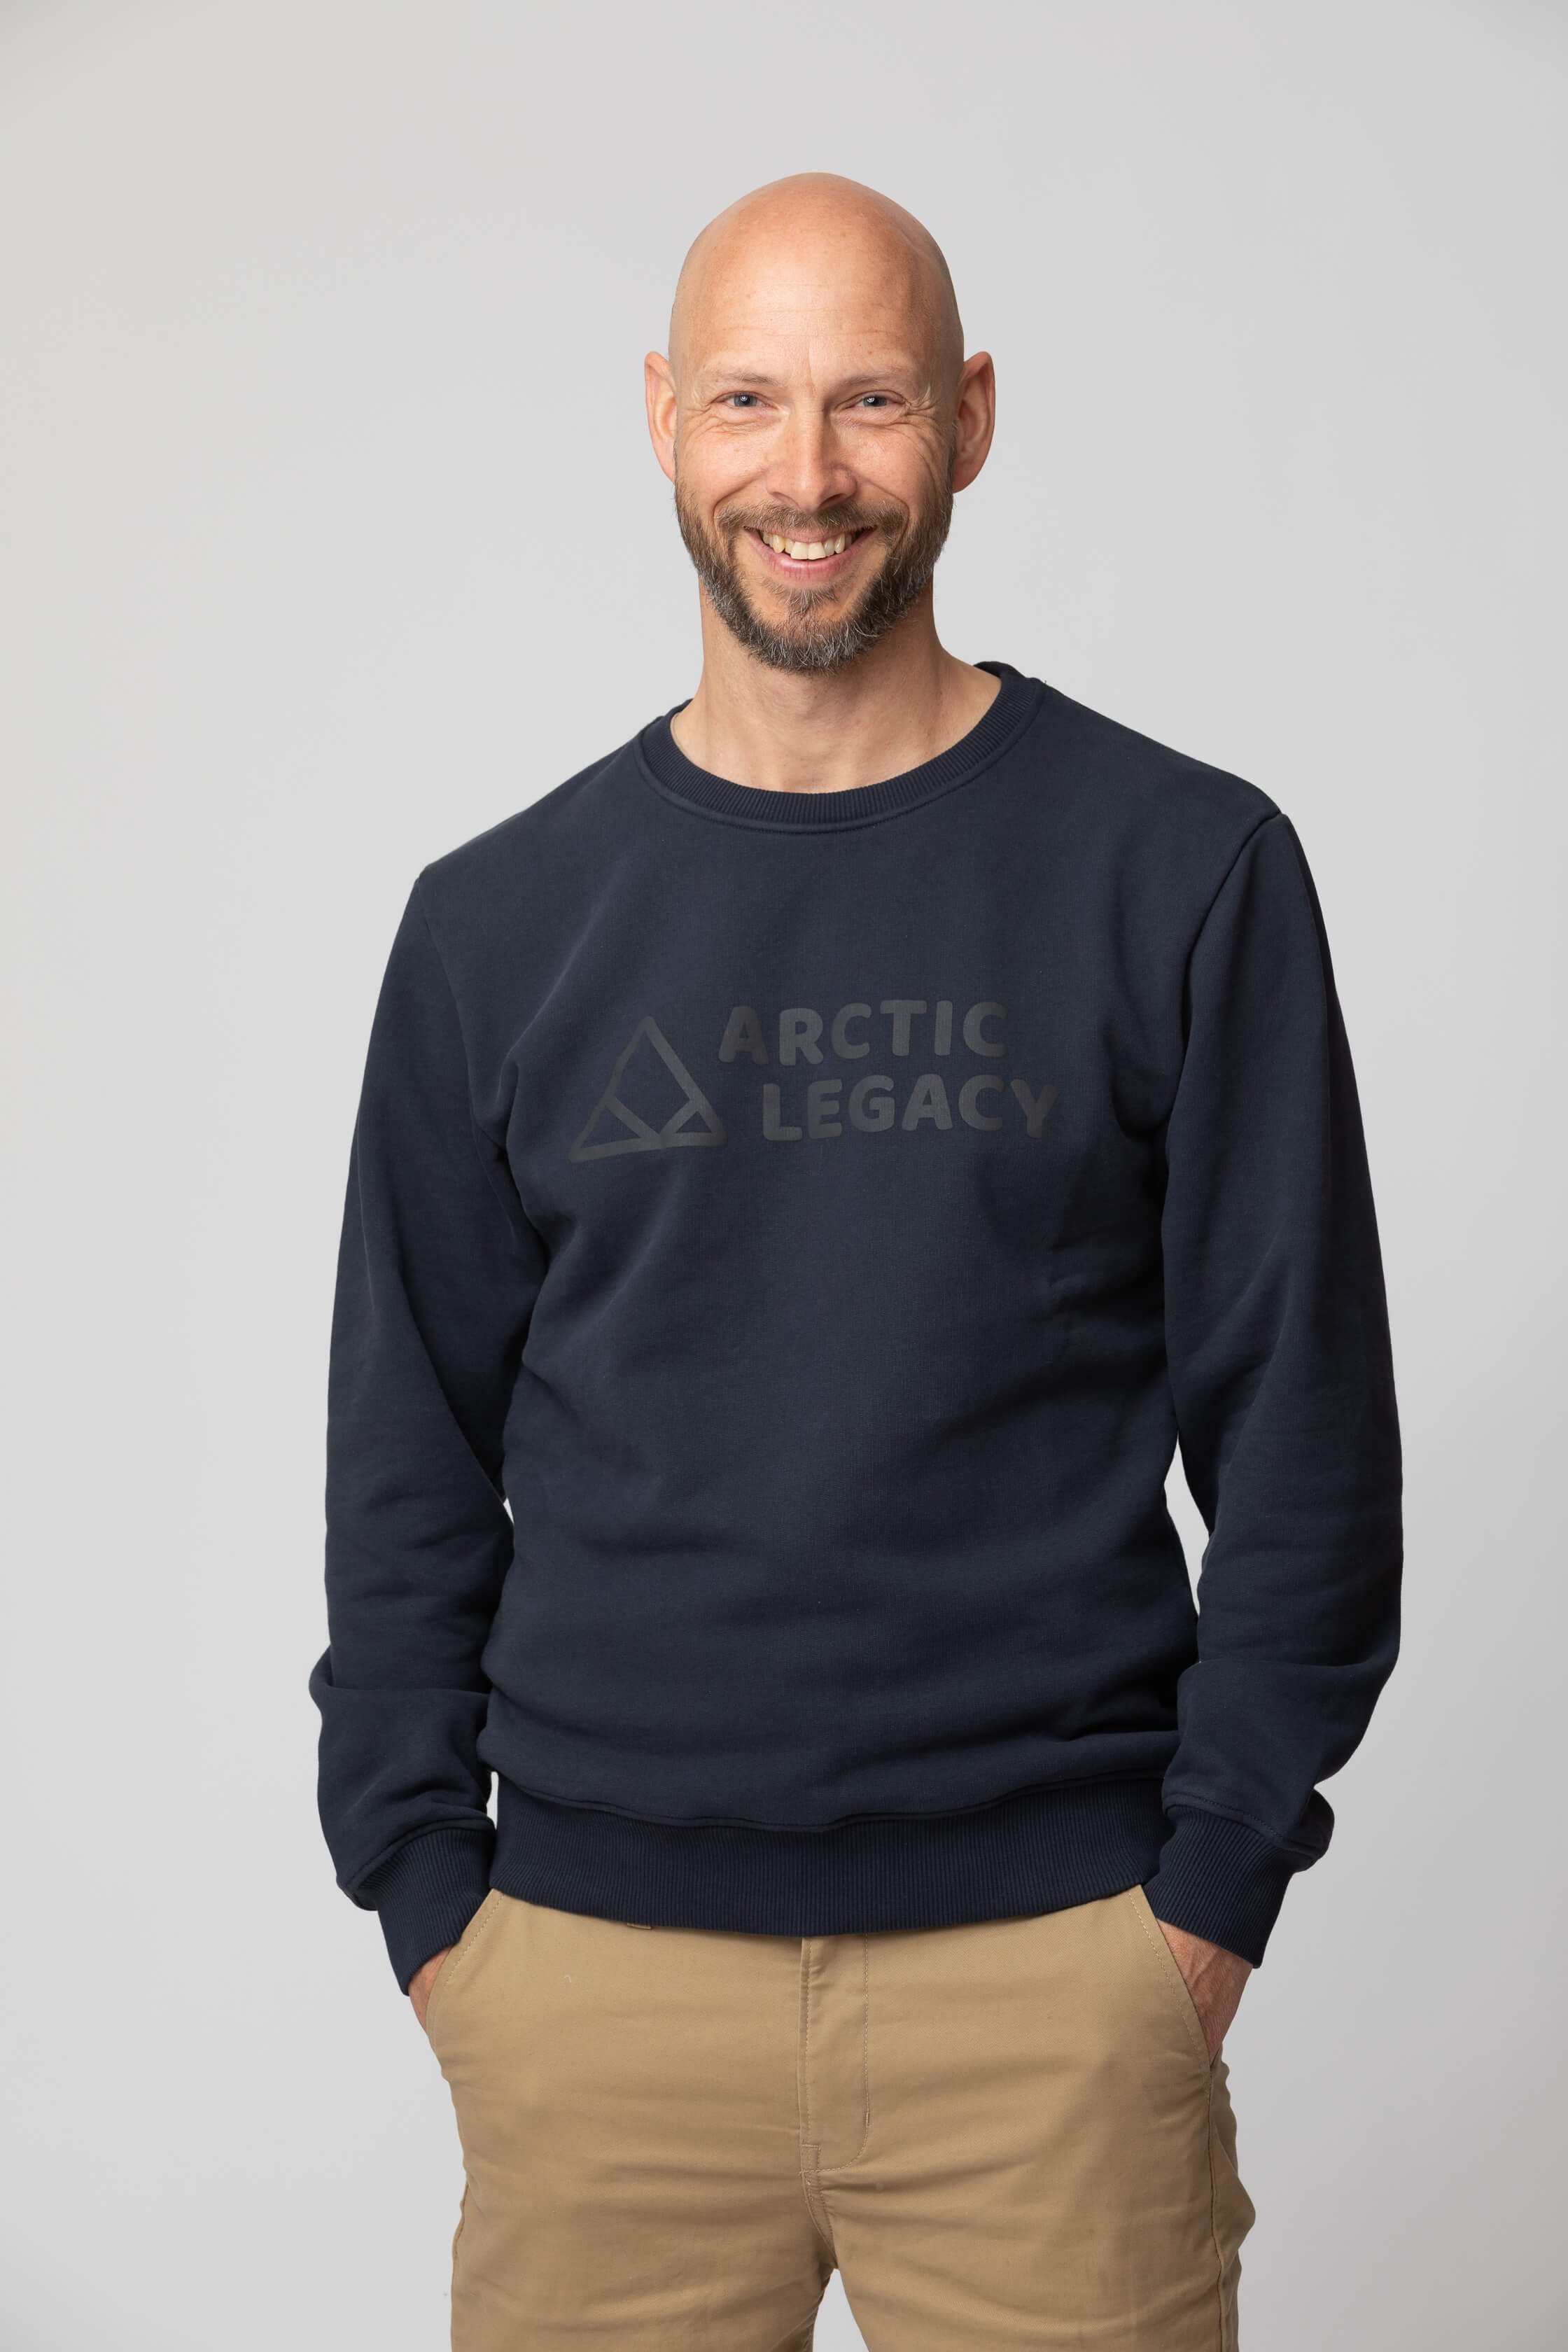 Ember Organic Crew Sweater for Men - Made in Europe - Arctic Legacy